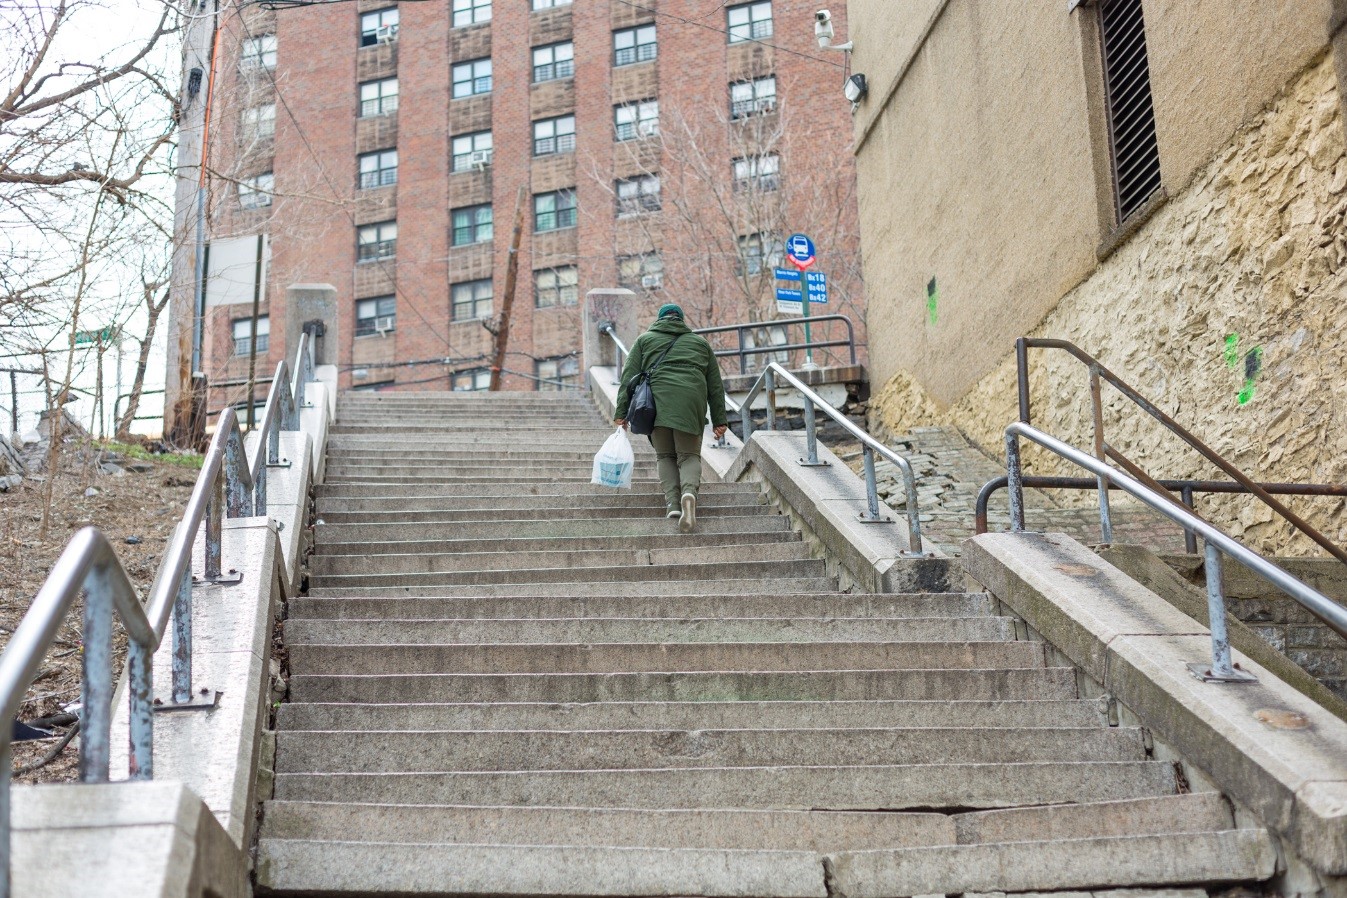 The West Tremont Avenue Step Street prior to renovation